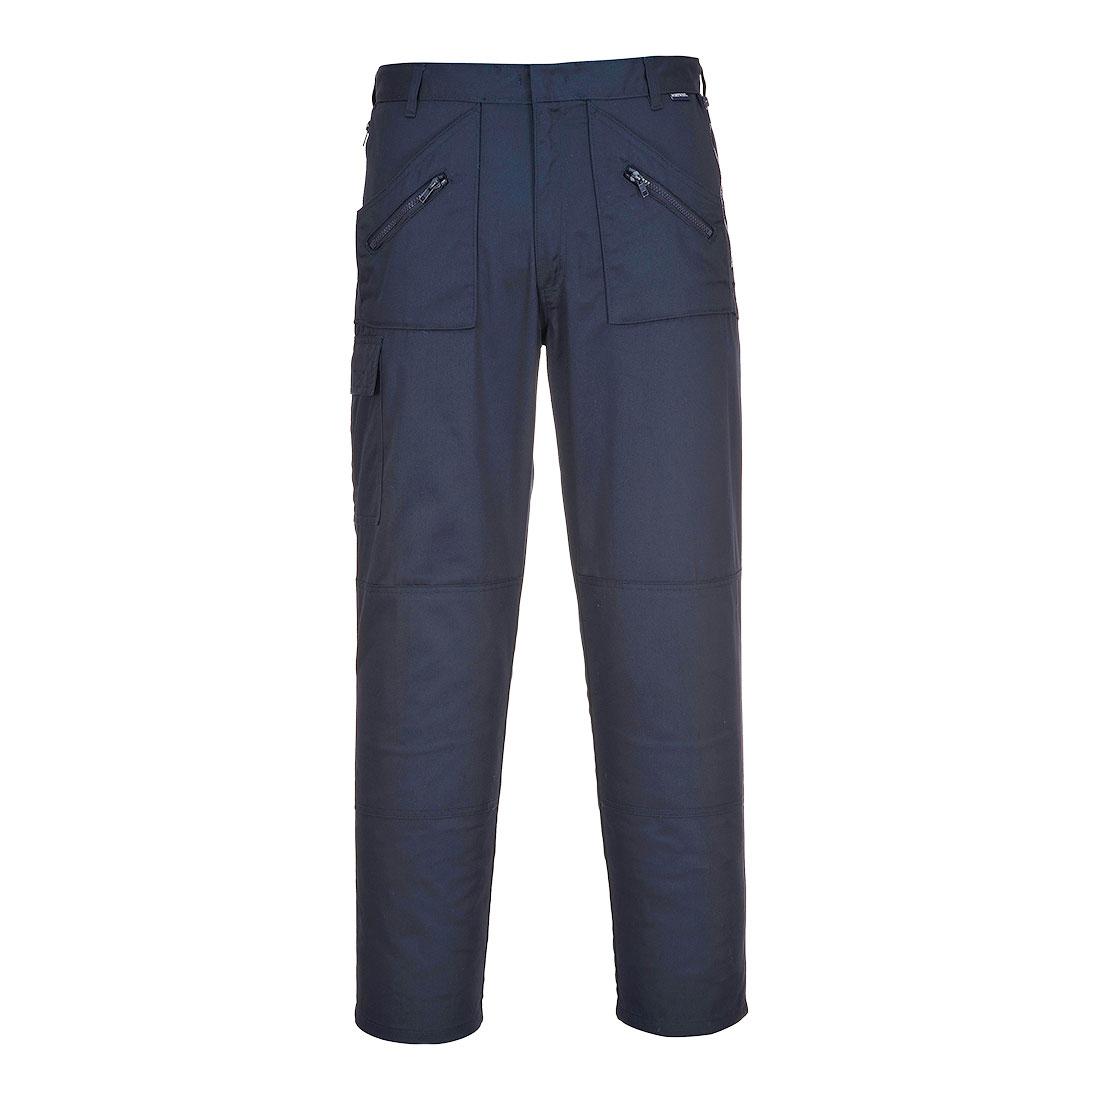 Trouser Navy – 38 – Work Safety Protective Equipment – Portwest – Regus Supply